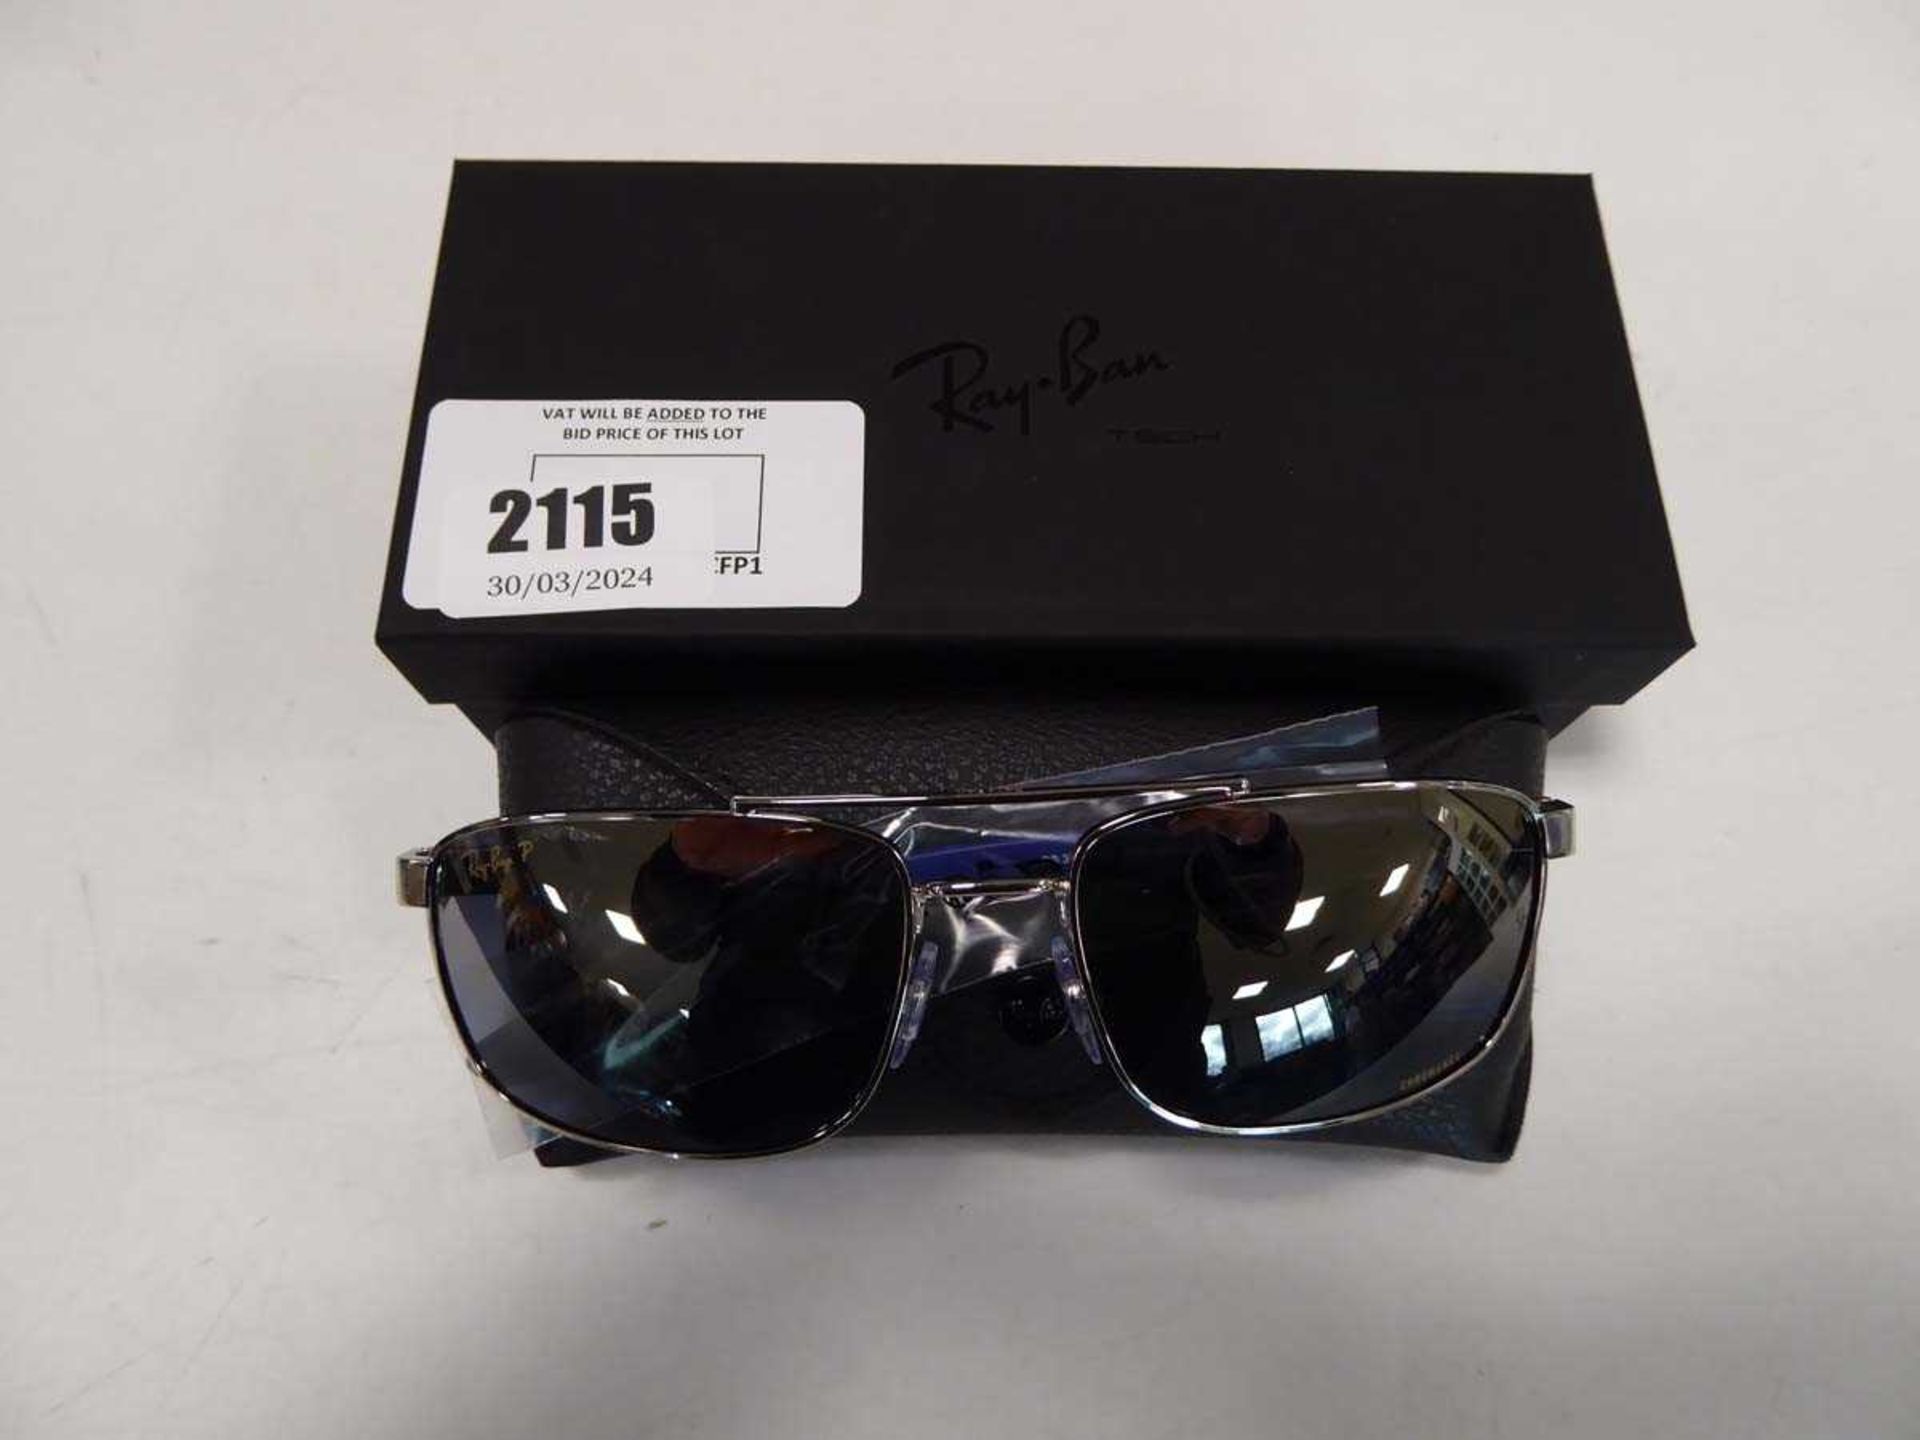 +VAT Ray-Ban sunglasses in case and box